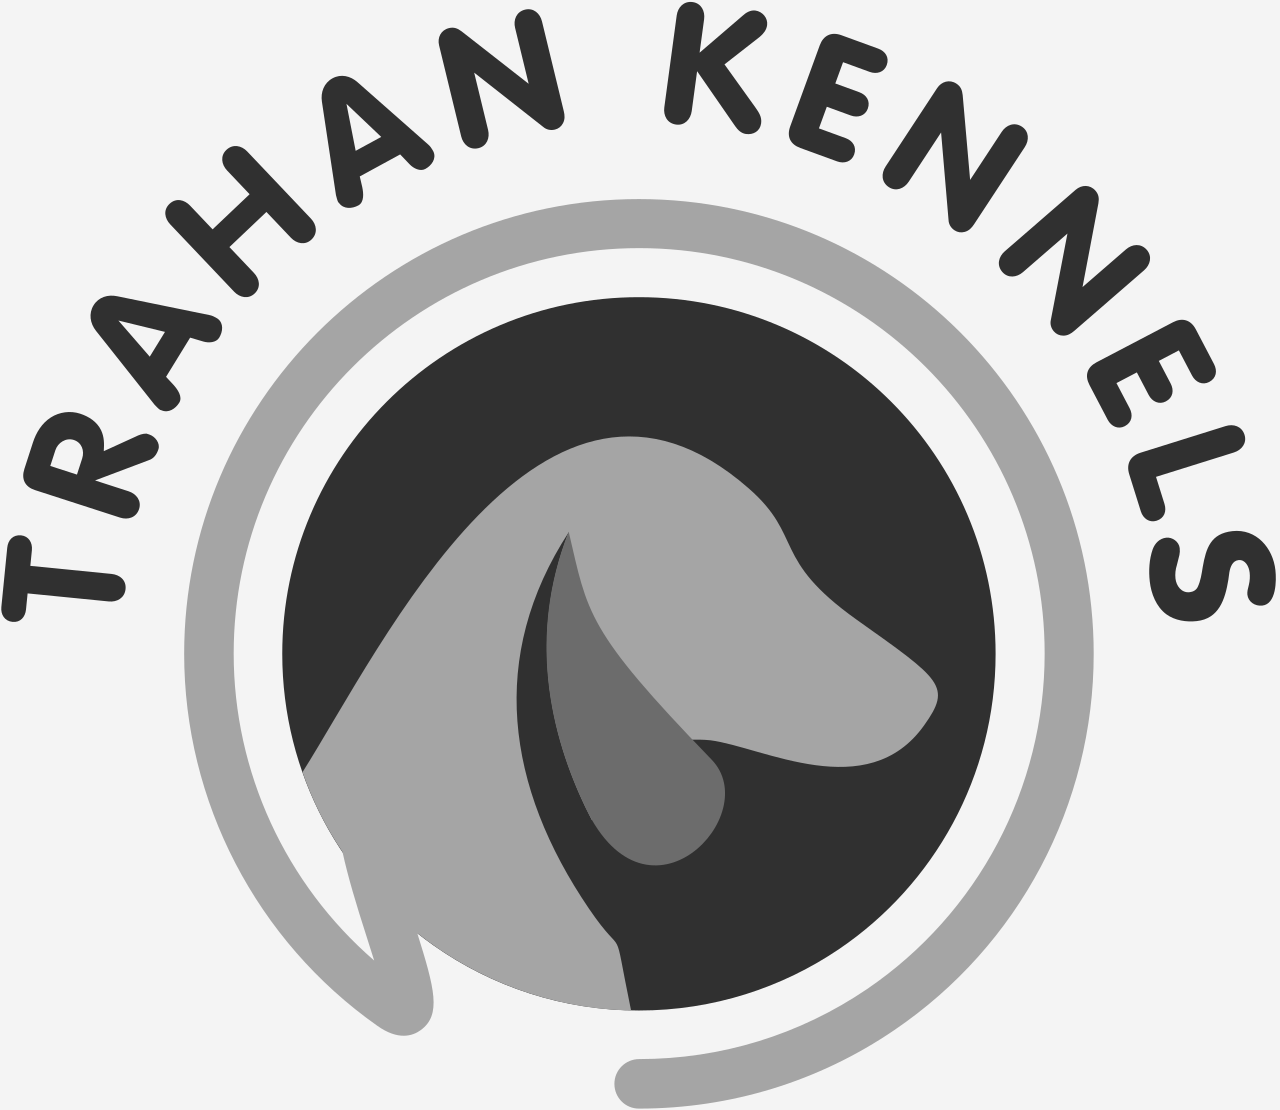 TRAHAN KENNELS's web page